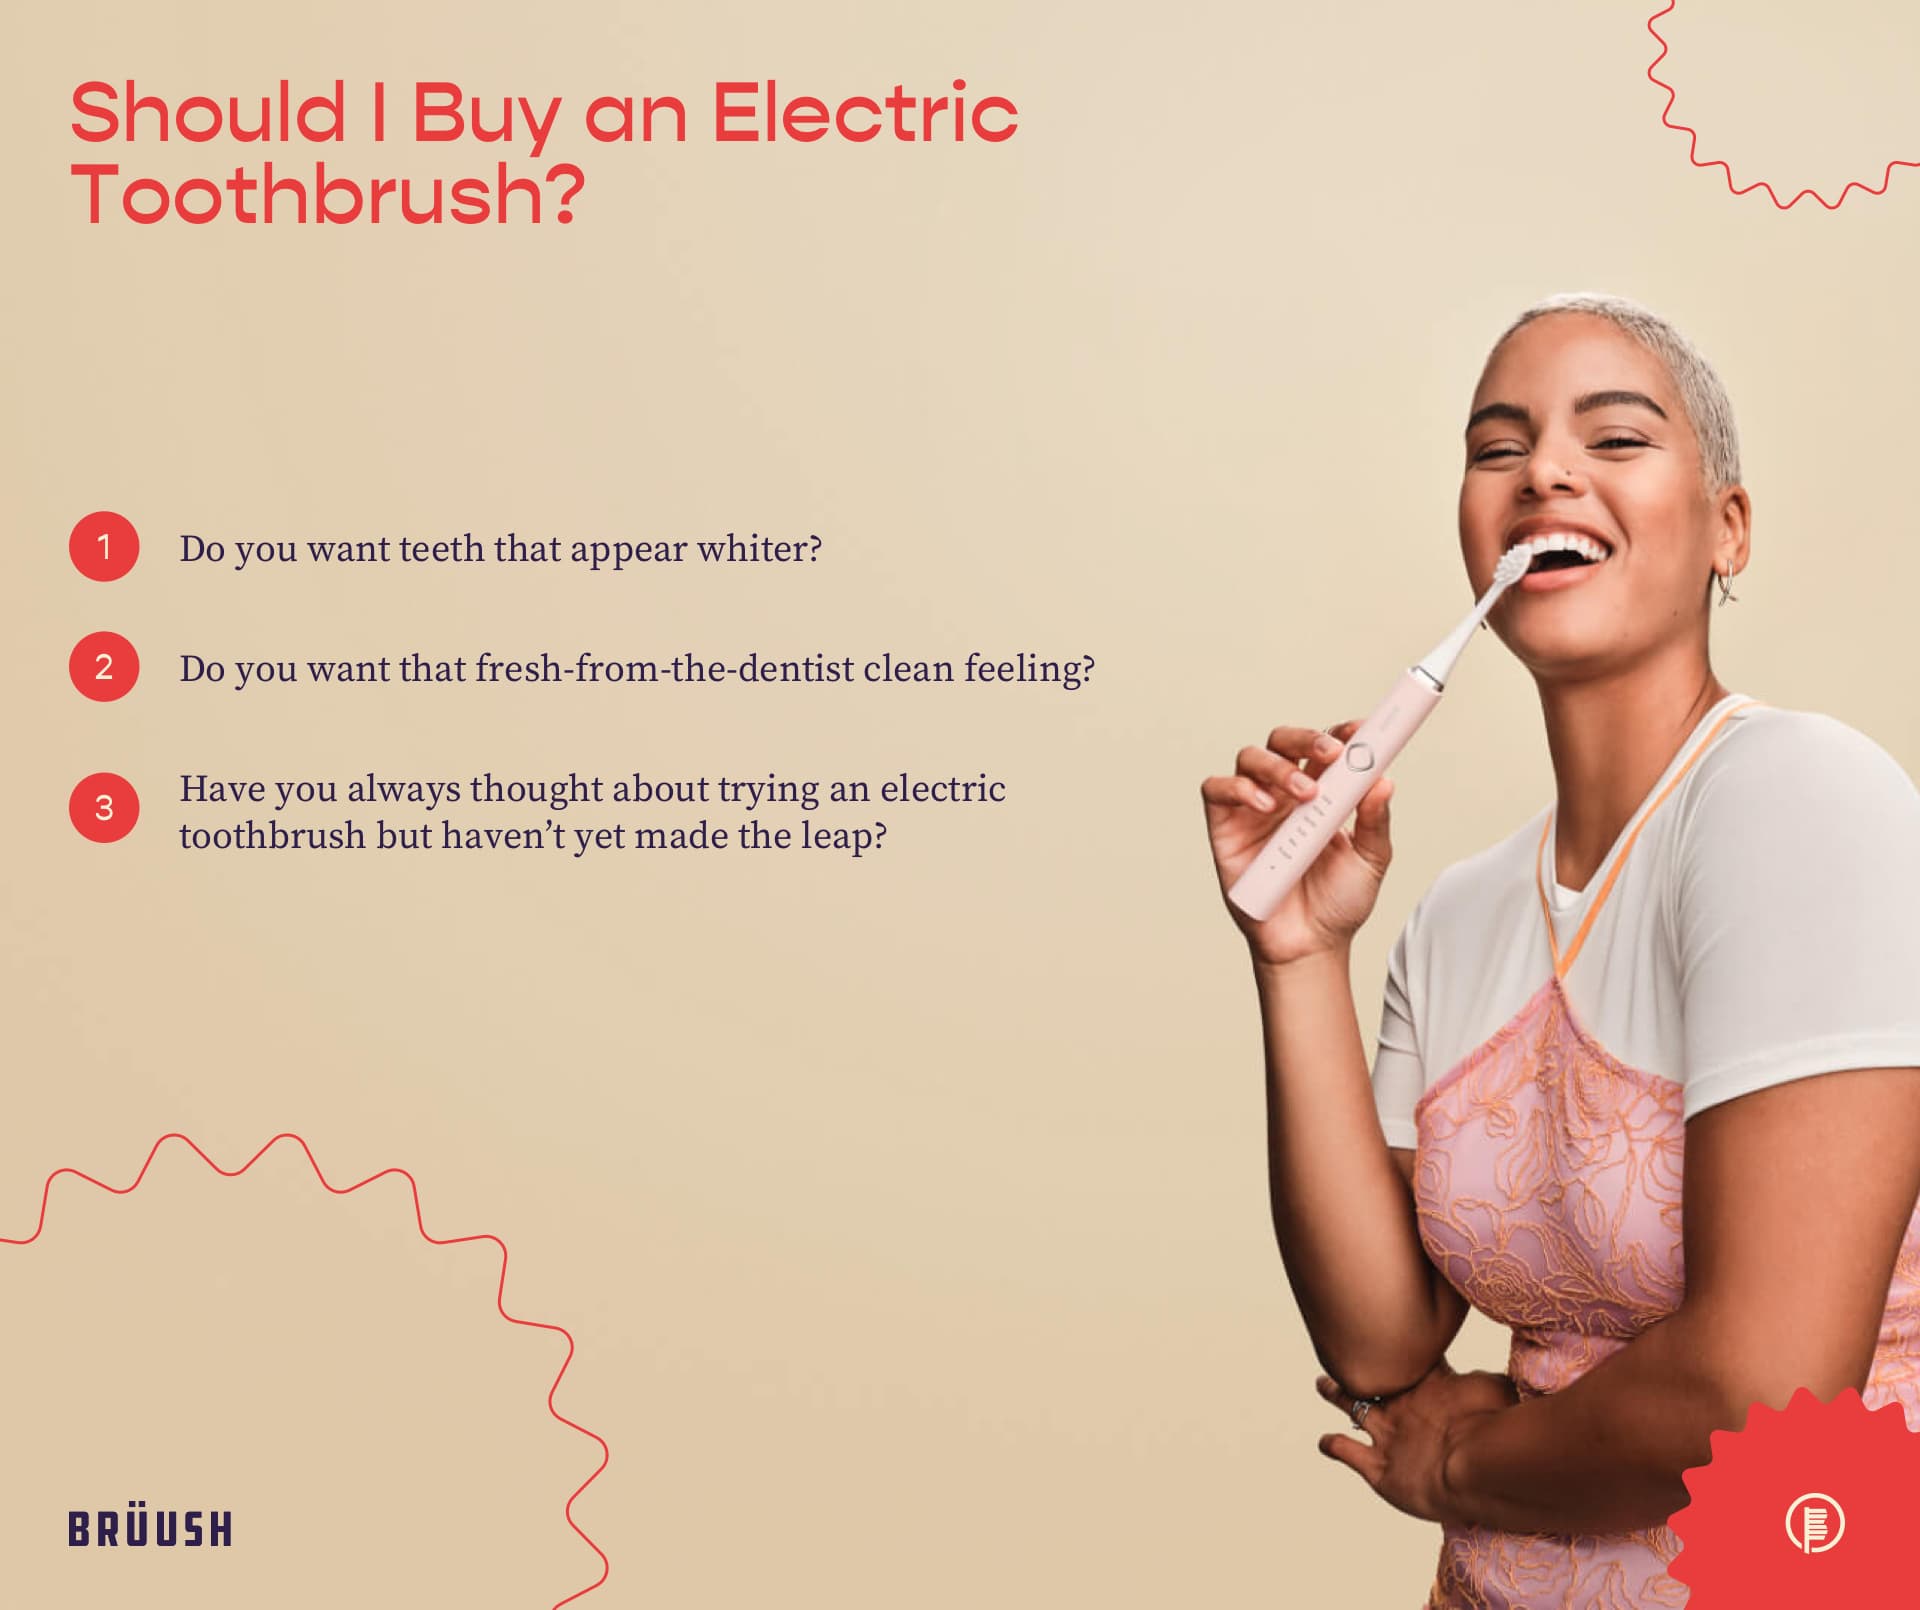 questions to ask yourself about buying an electric toothbrush